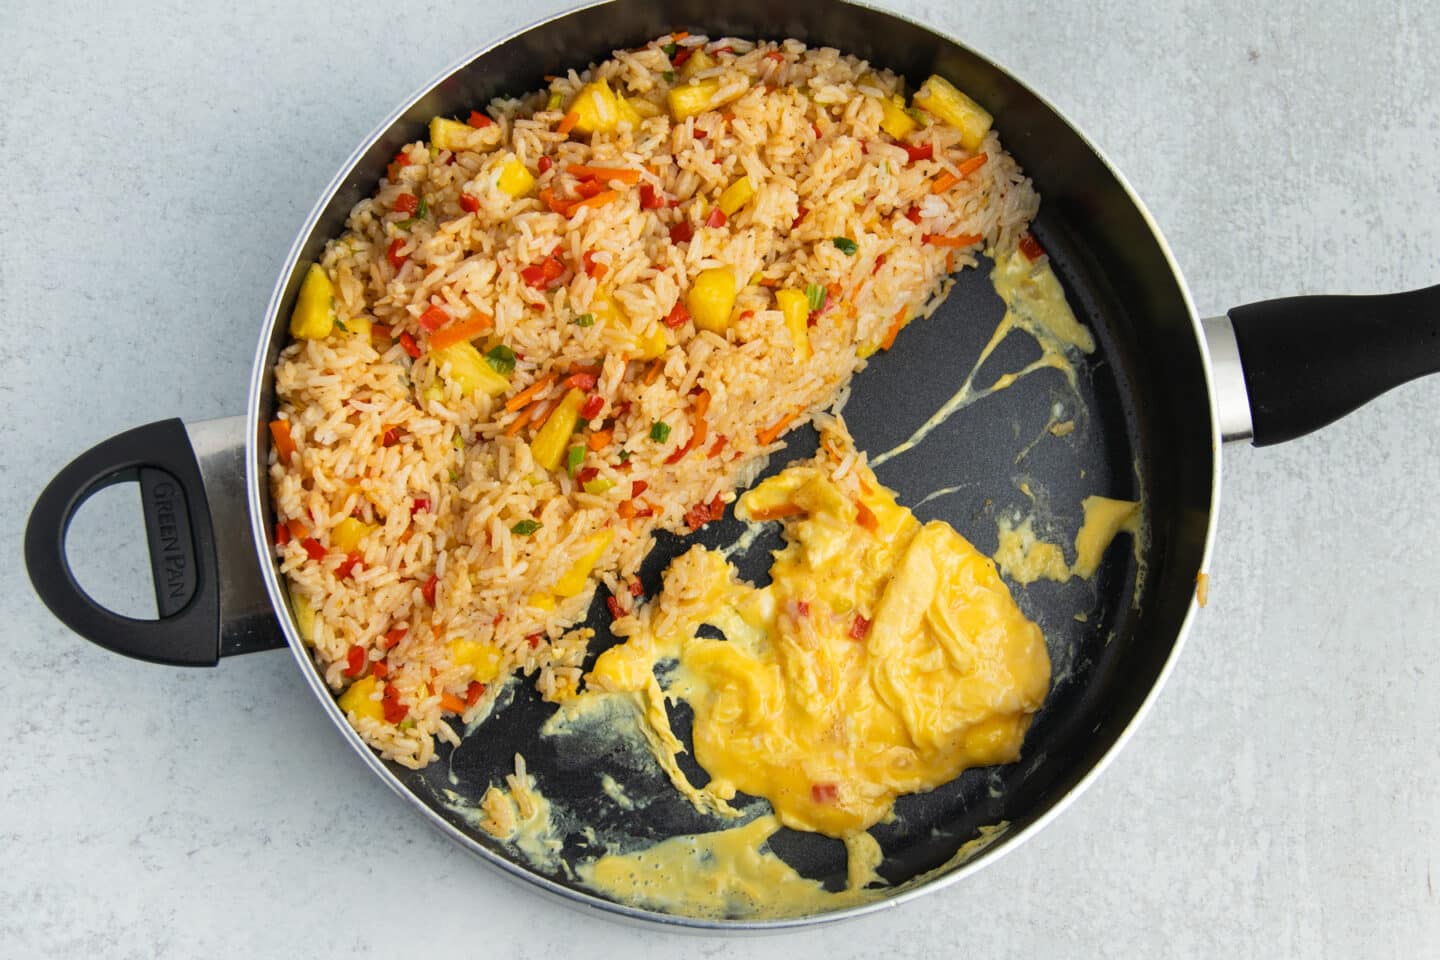 Picture of skillet with fried rice to one side and scrambled eggs on the other.